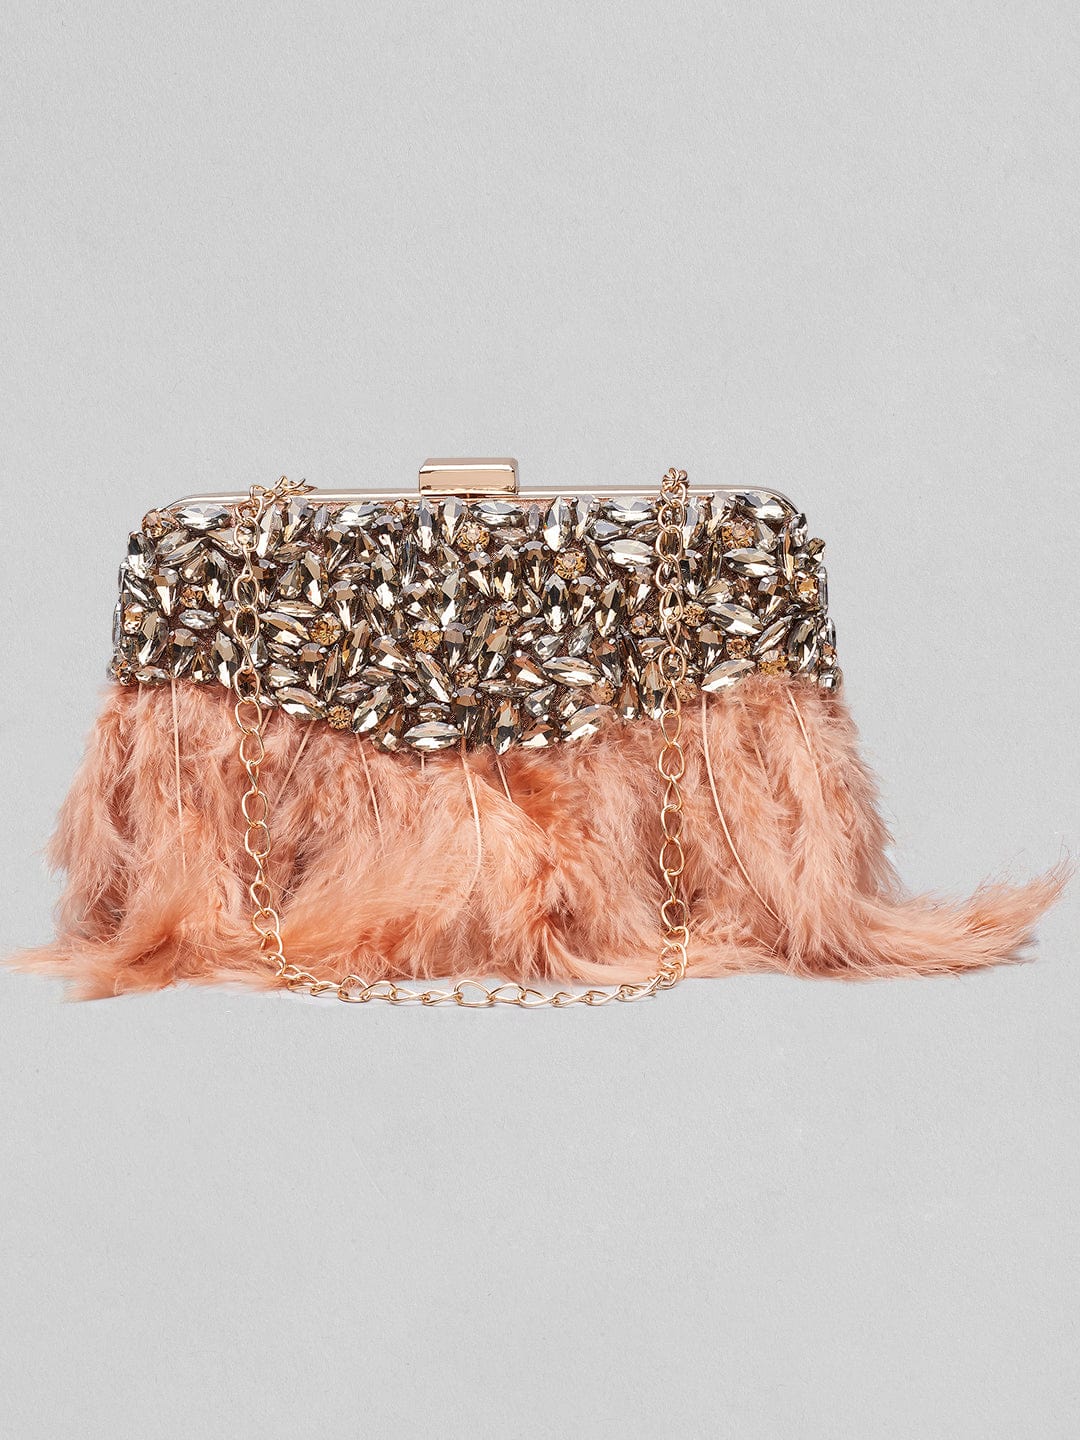 Rubans Brown Colour Clutch Bag With Studded Stone And Brown Fur. Handbag & Wallet Accessories